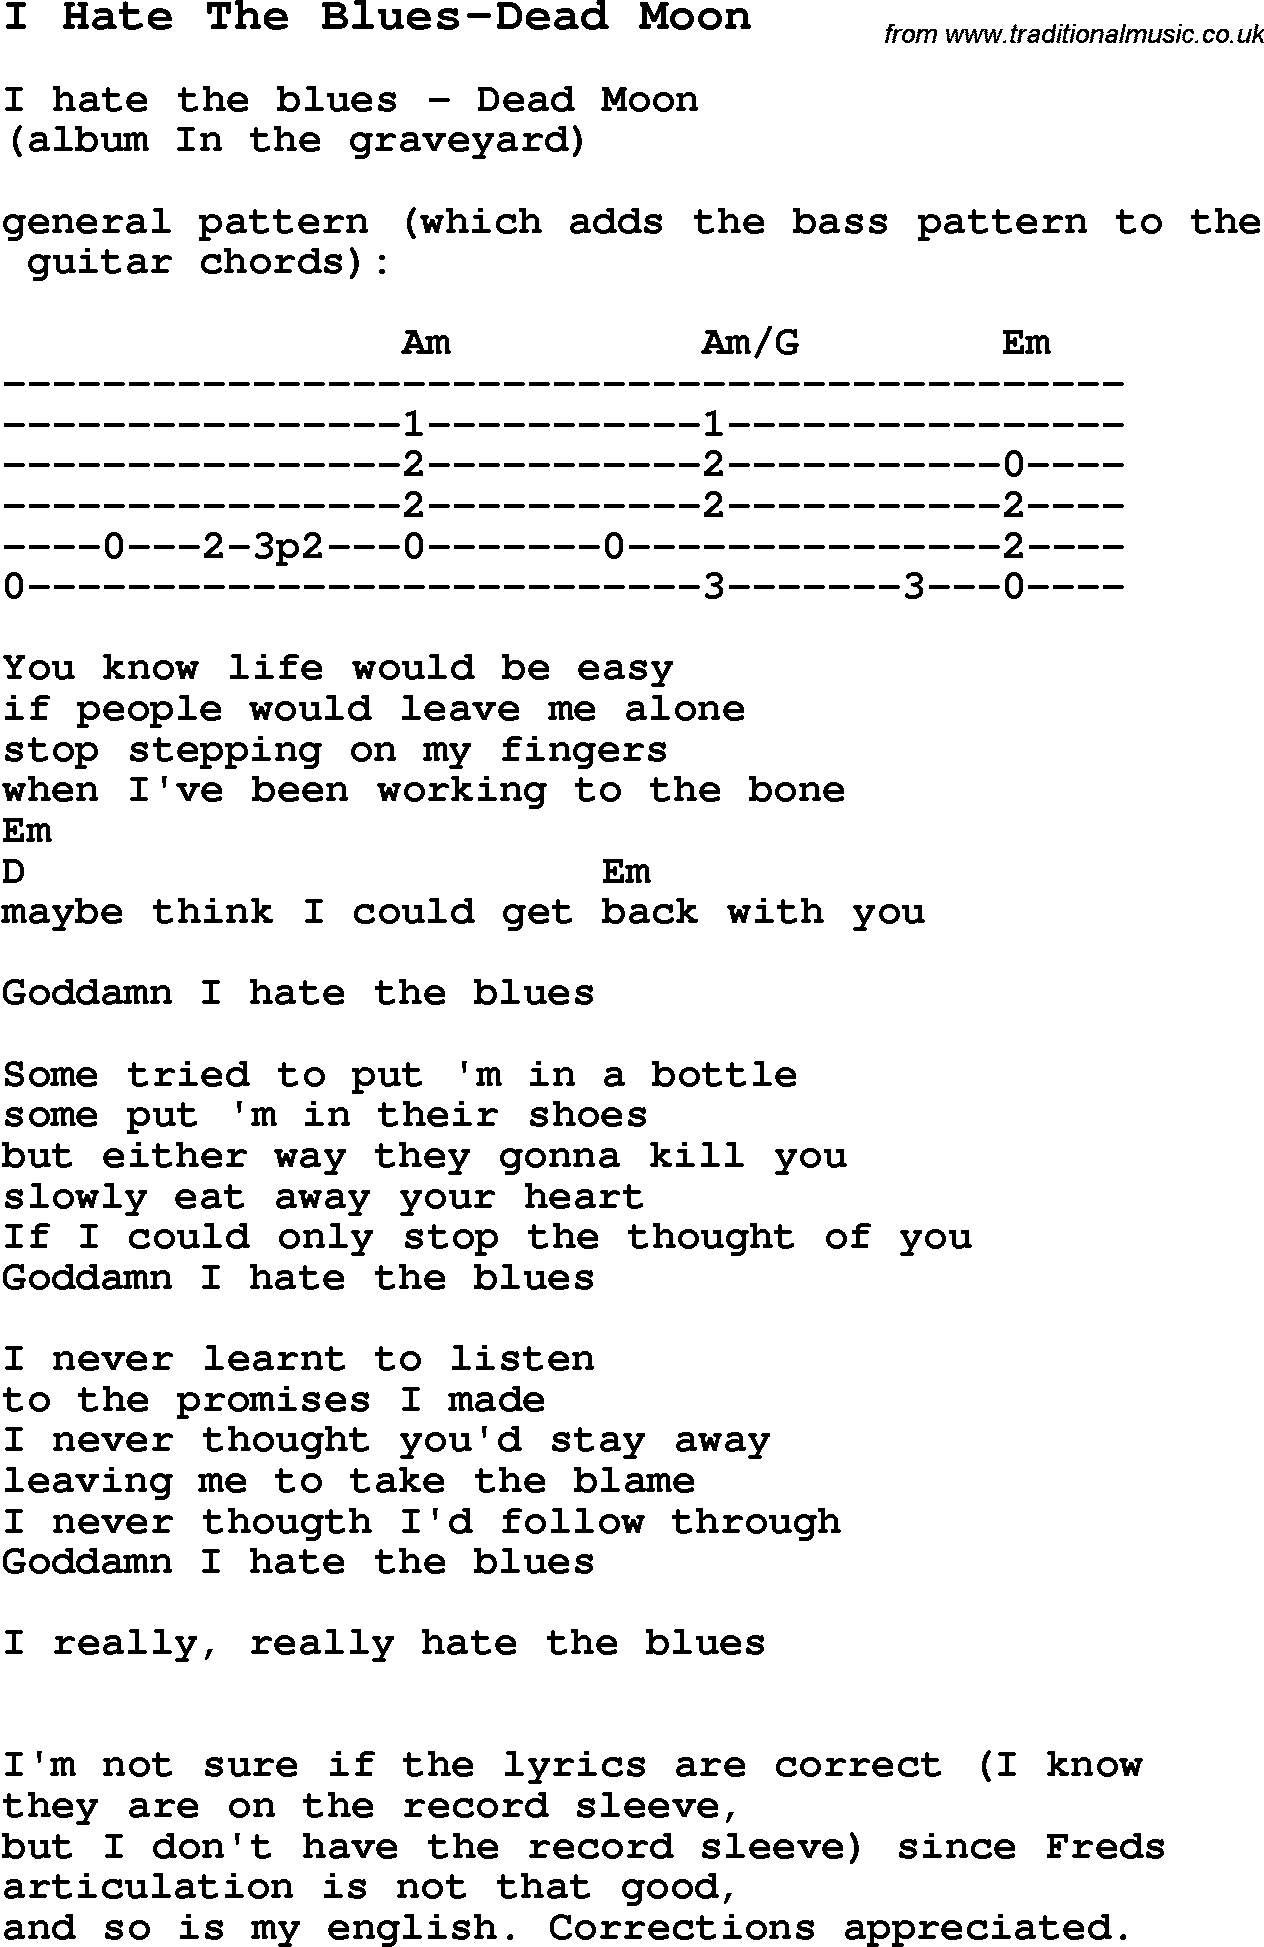 Blues Guitar Song, lyrics, chords, tablature, playing hints for I Hate The Blues-Dead Moon